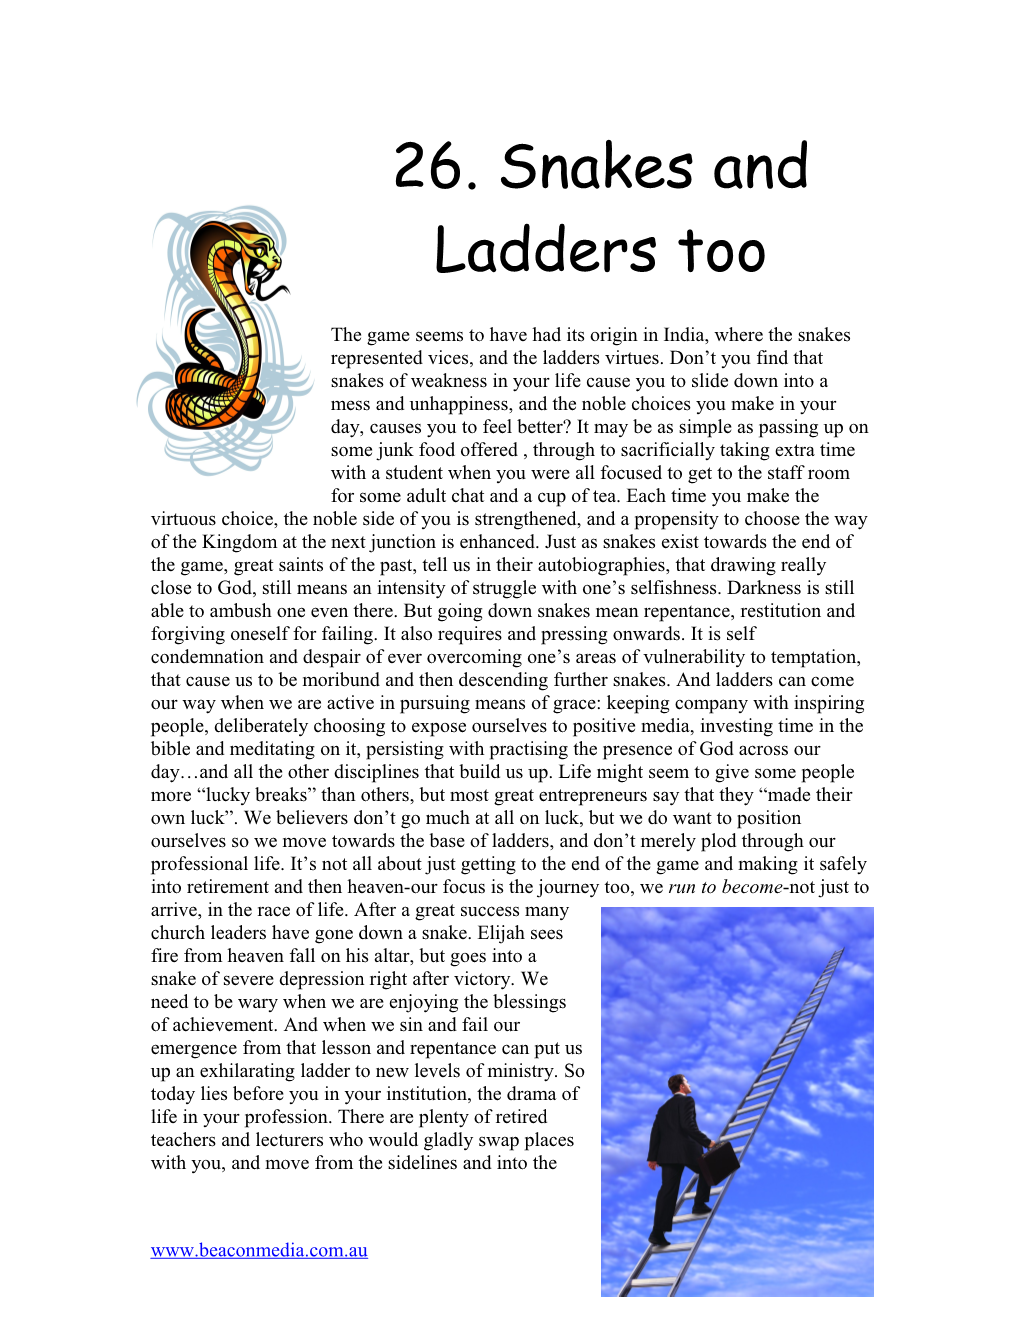 26. Snakes and Ladders Too